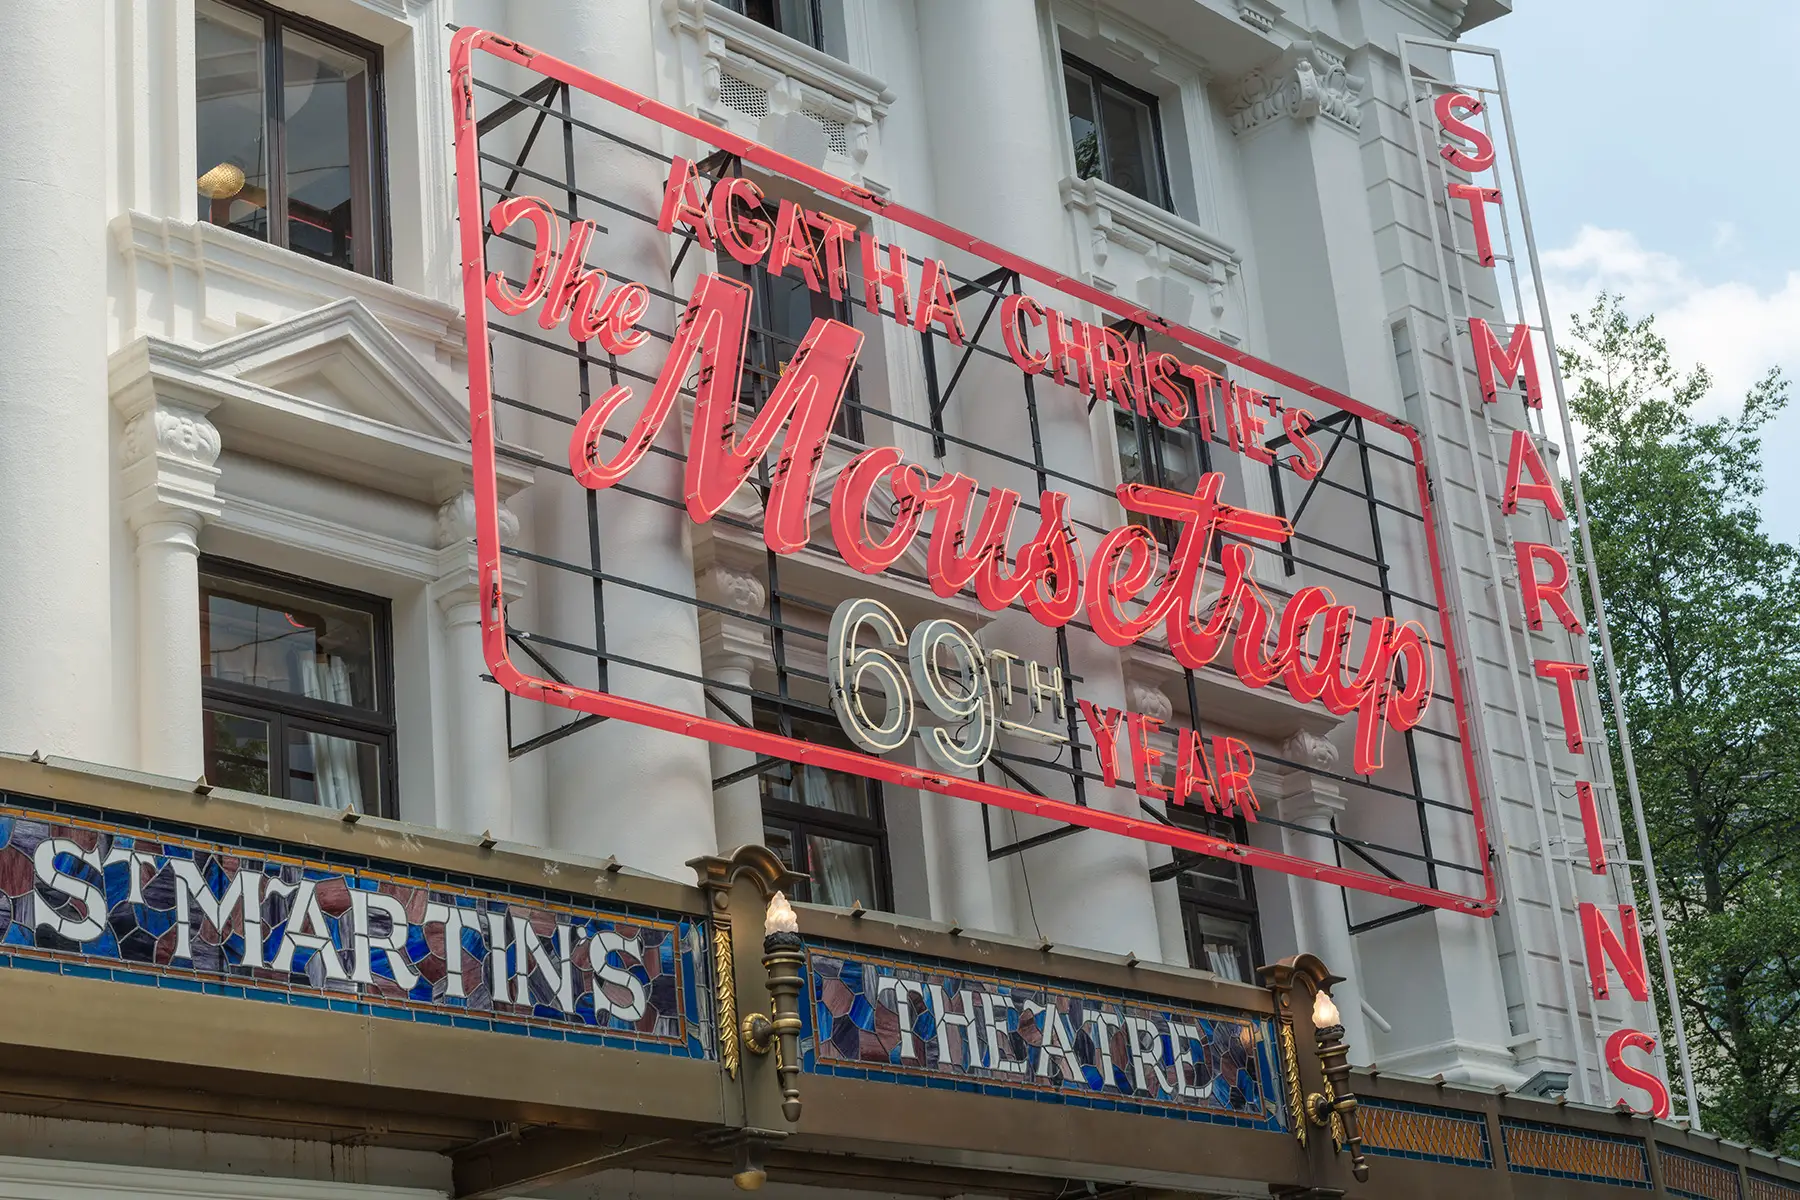 St Martin's Theater with a sign for The Mousetrap